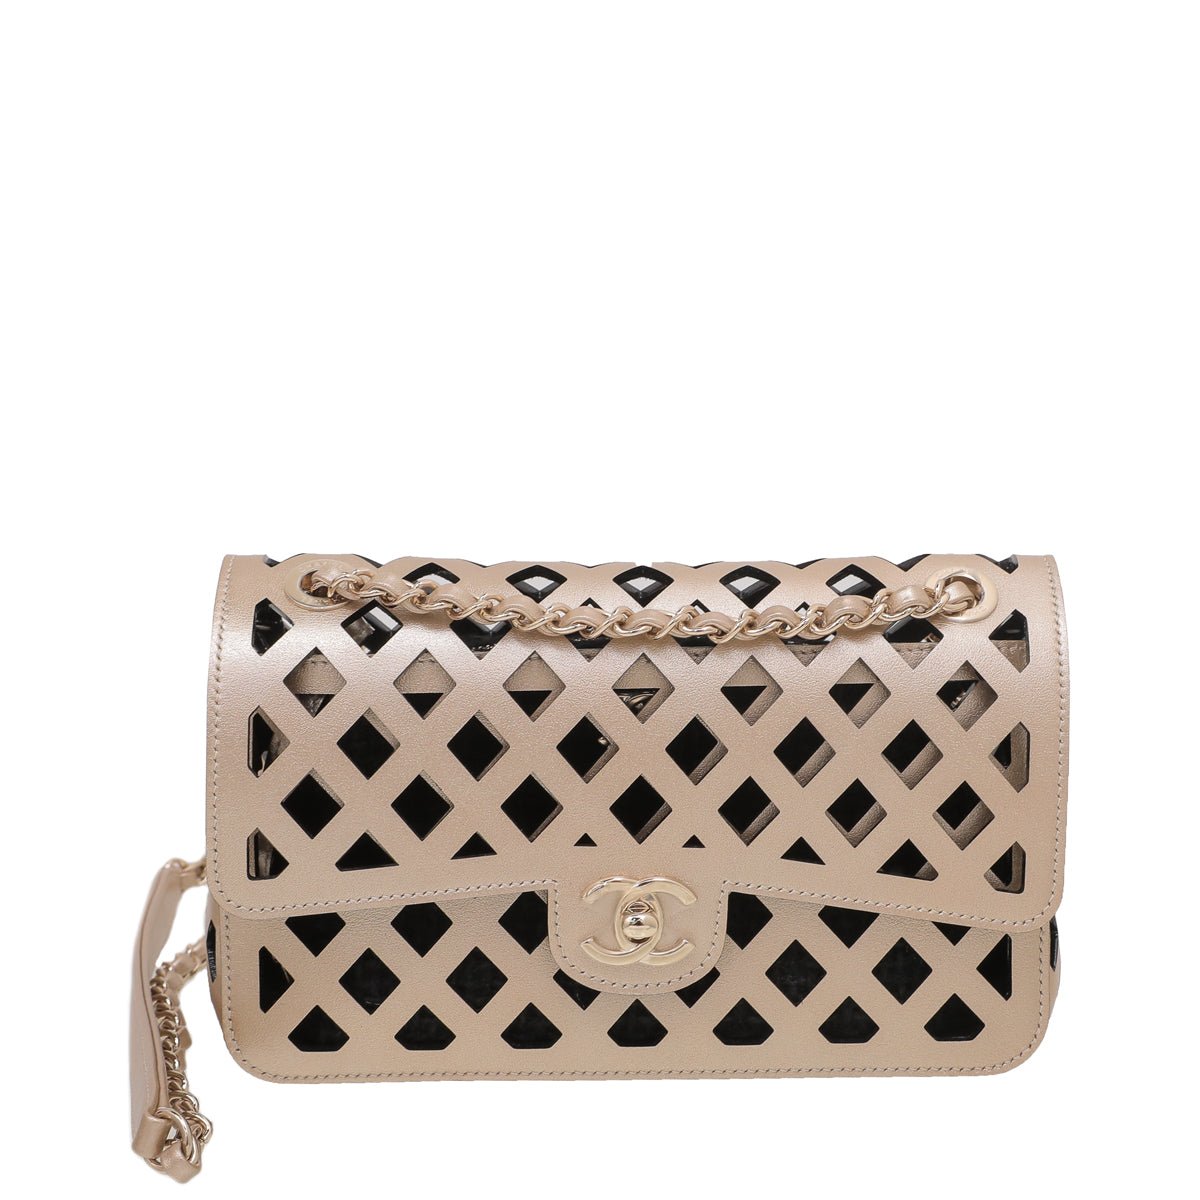 The Closet - Chanel Bicolor Perforated Flap Tweed Pouch | The Closet